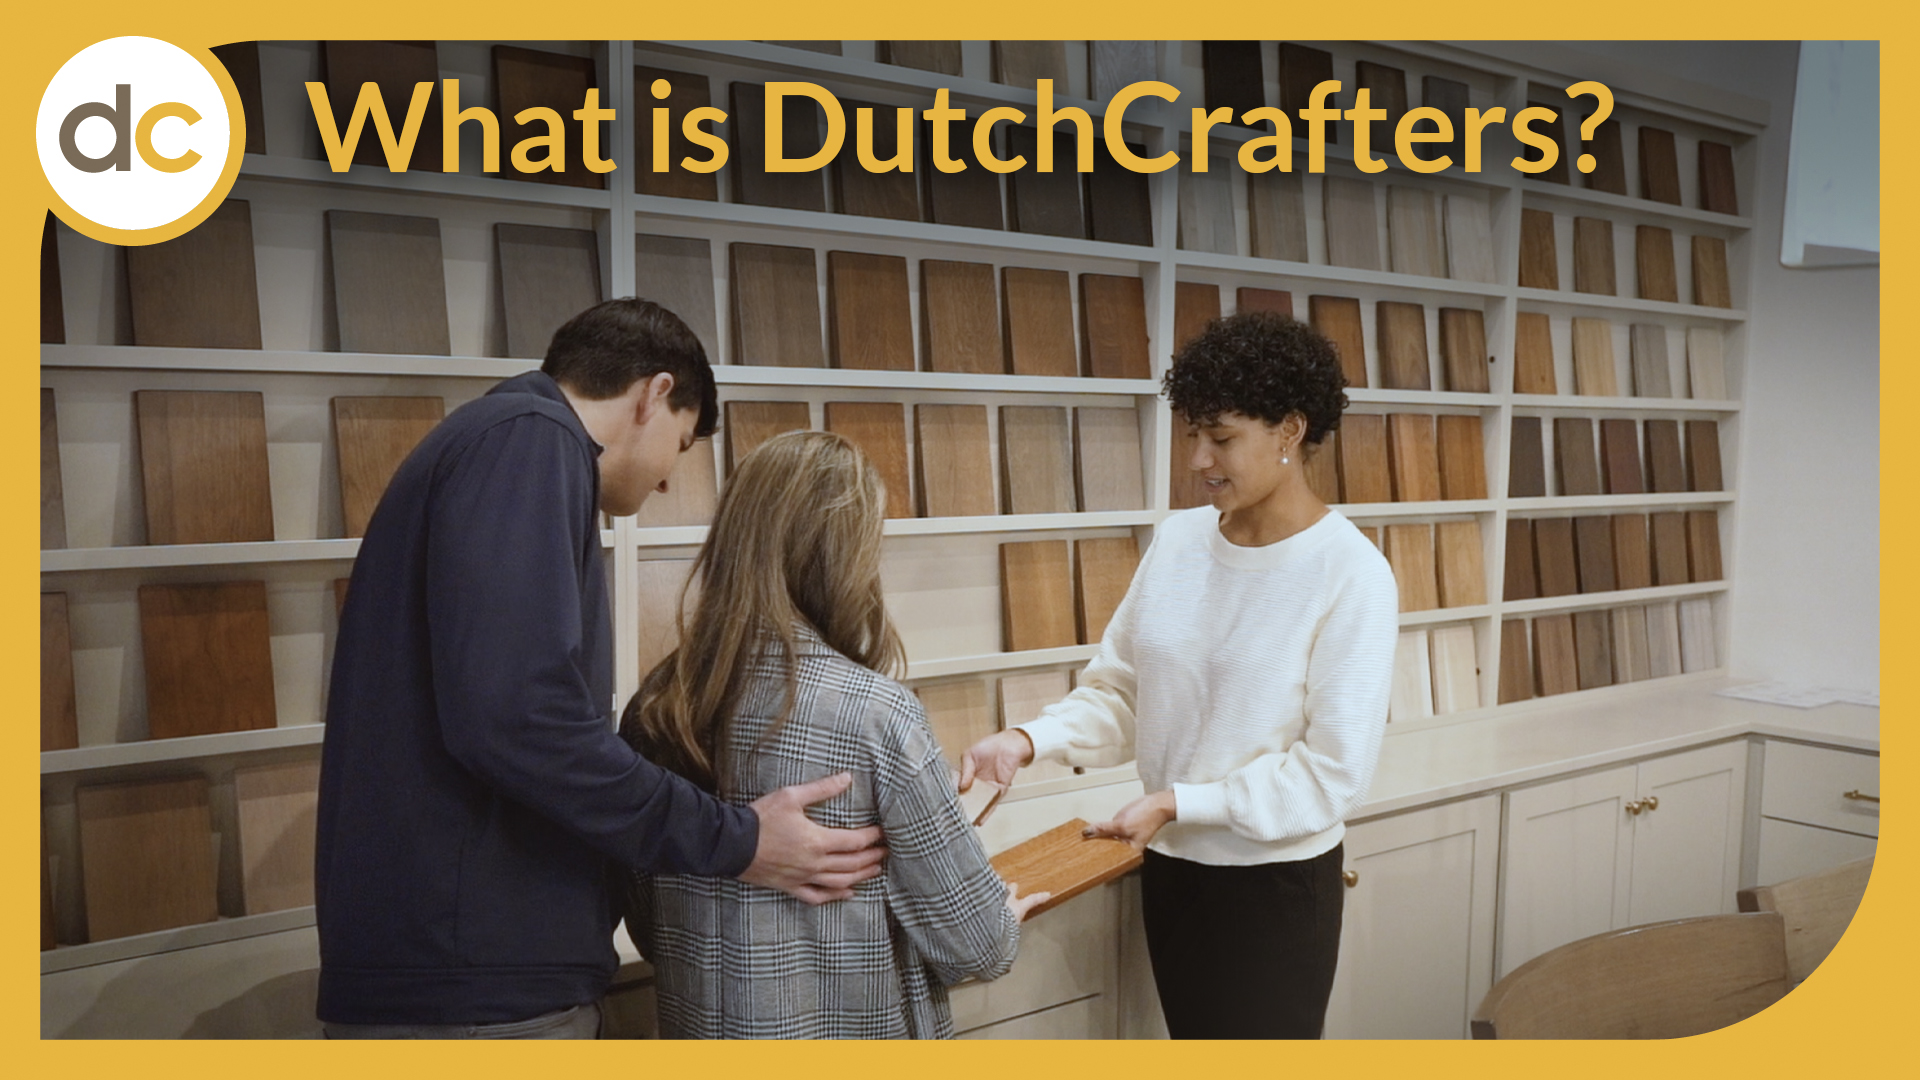 Customers view custom wood options at DutchCrafters with title, "What is DutchCrafters?"